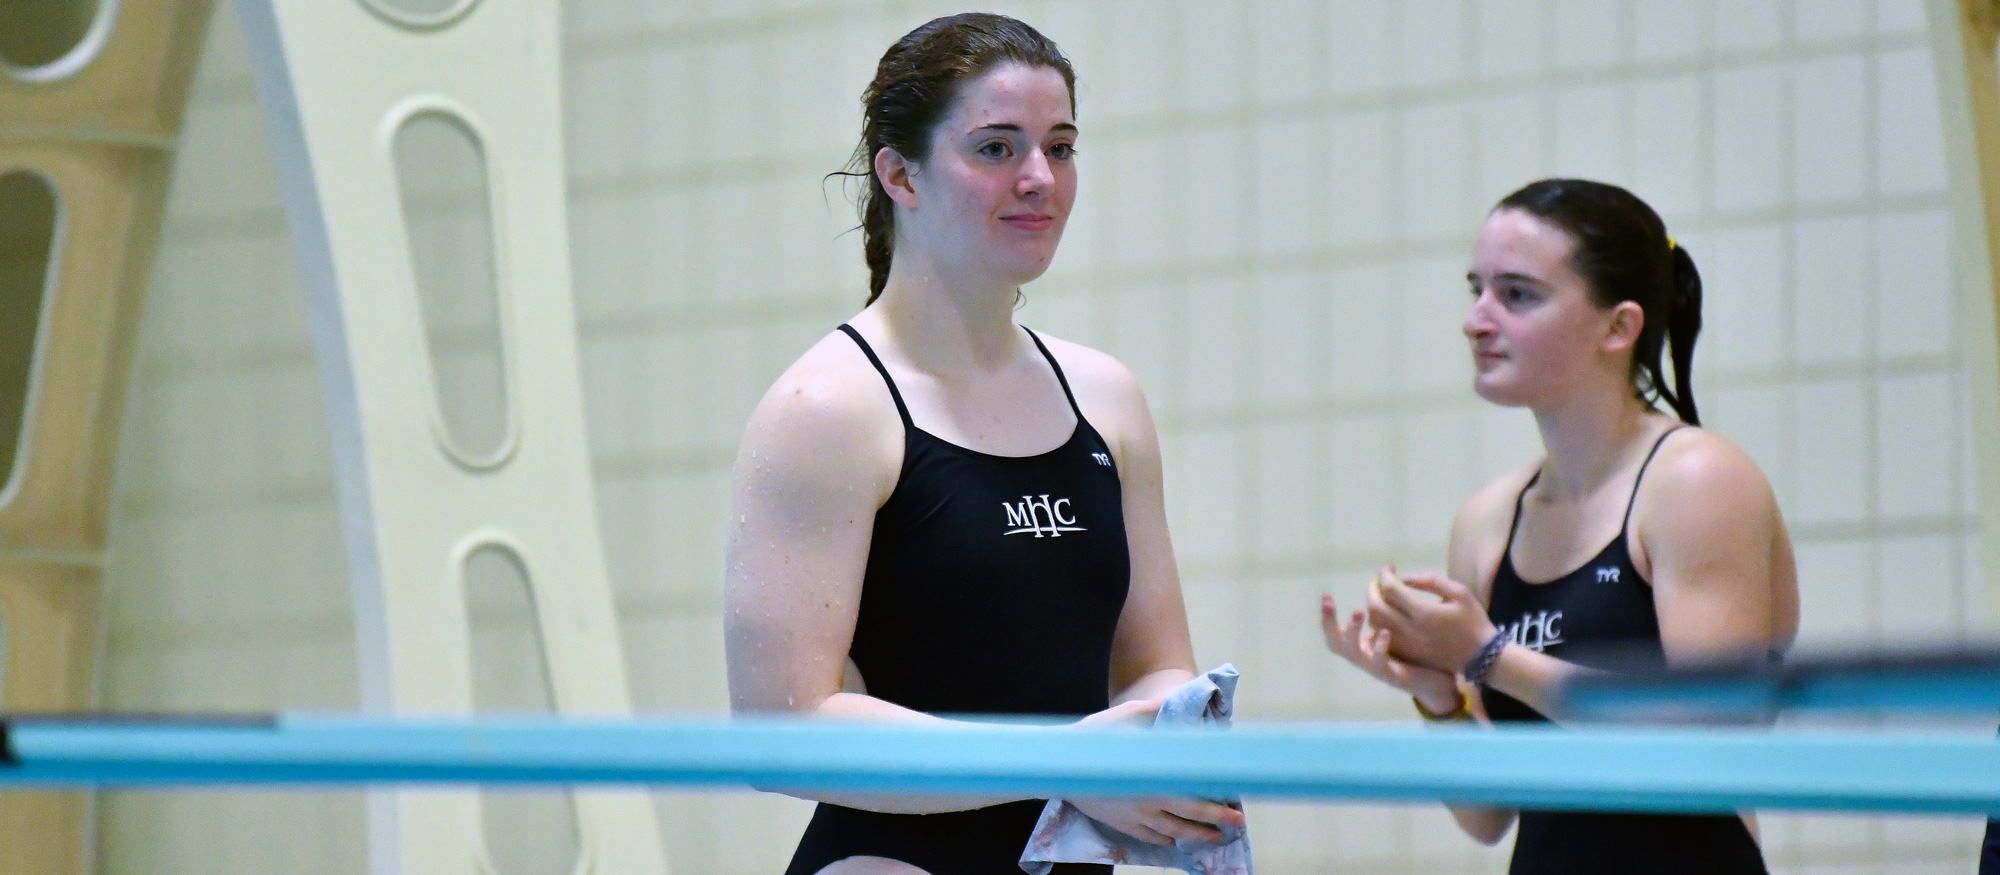 Mount Holyoke diving All-American Kathryn Murphy '22 was named a First Team Scholar All-American by the College Swimming & Diving Coaches Association of America. (RJB Sports file photo)